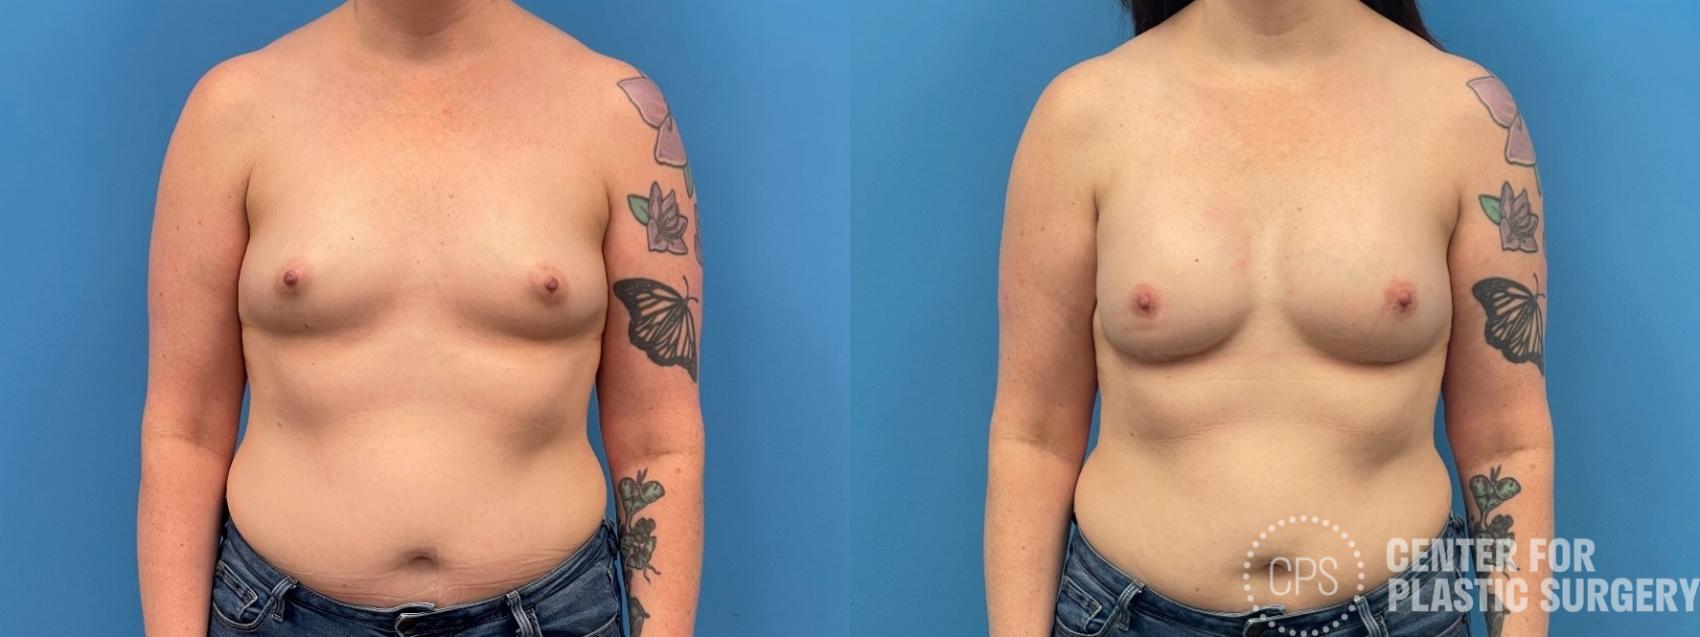 Breast Augmentation Case 335 Before & After Front | Chevy Chase & Annandale, Washington D.C. Metropolitan Area | Center for Plastic Surgery